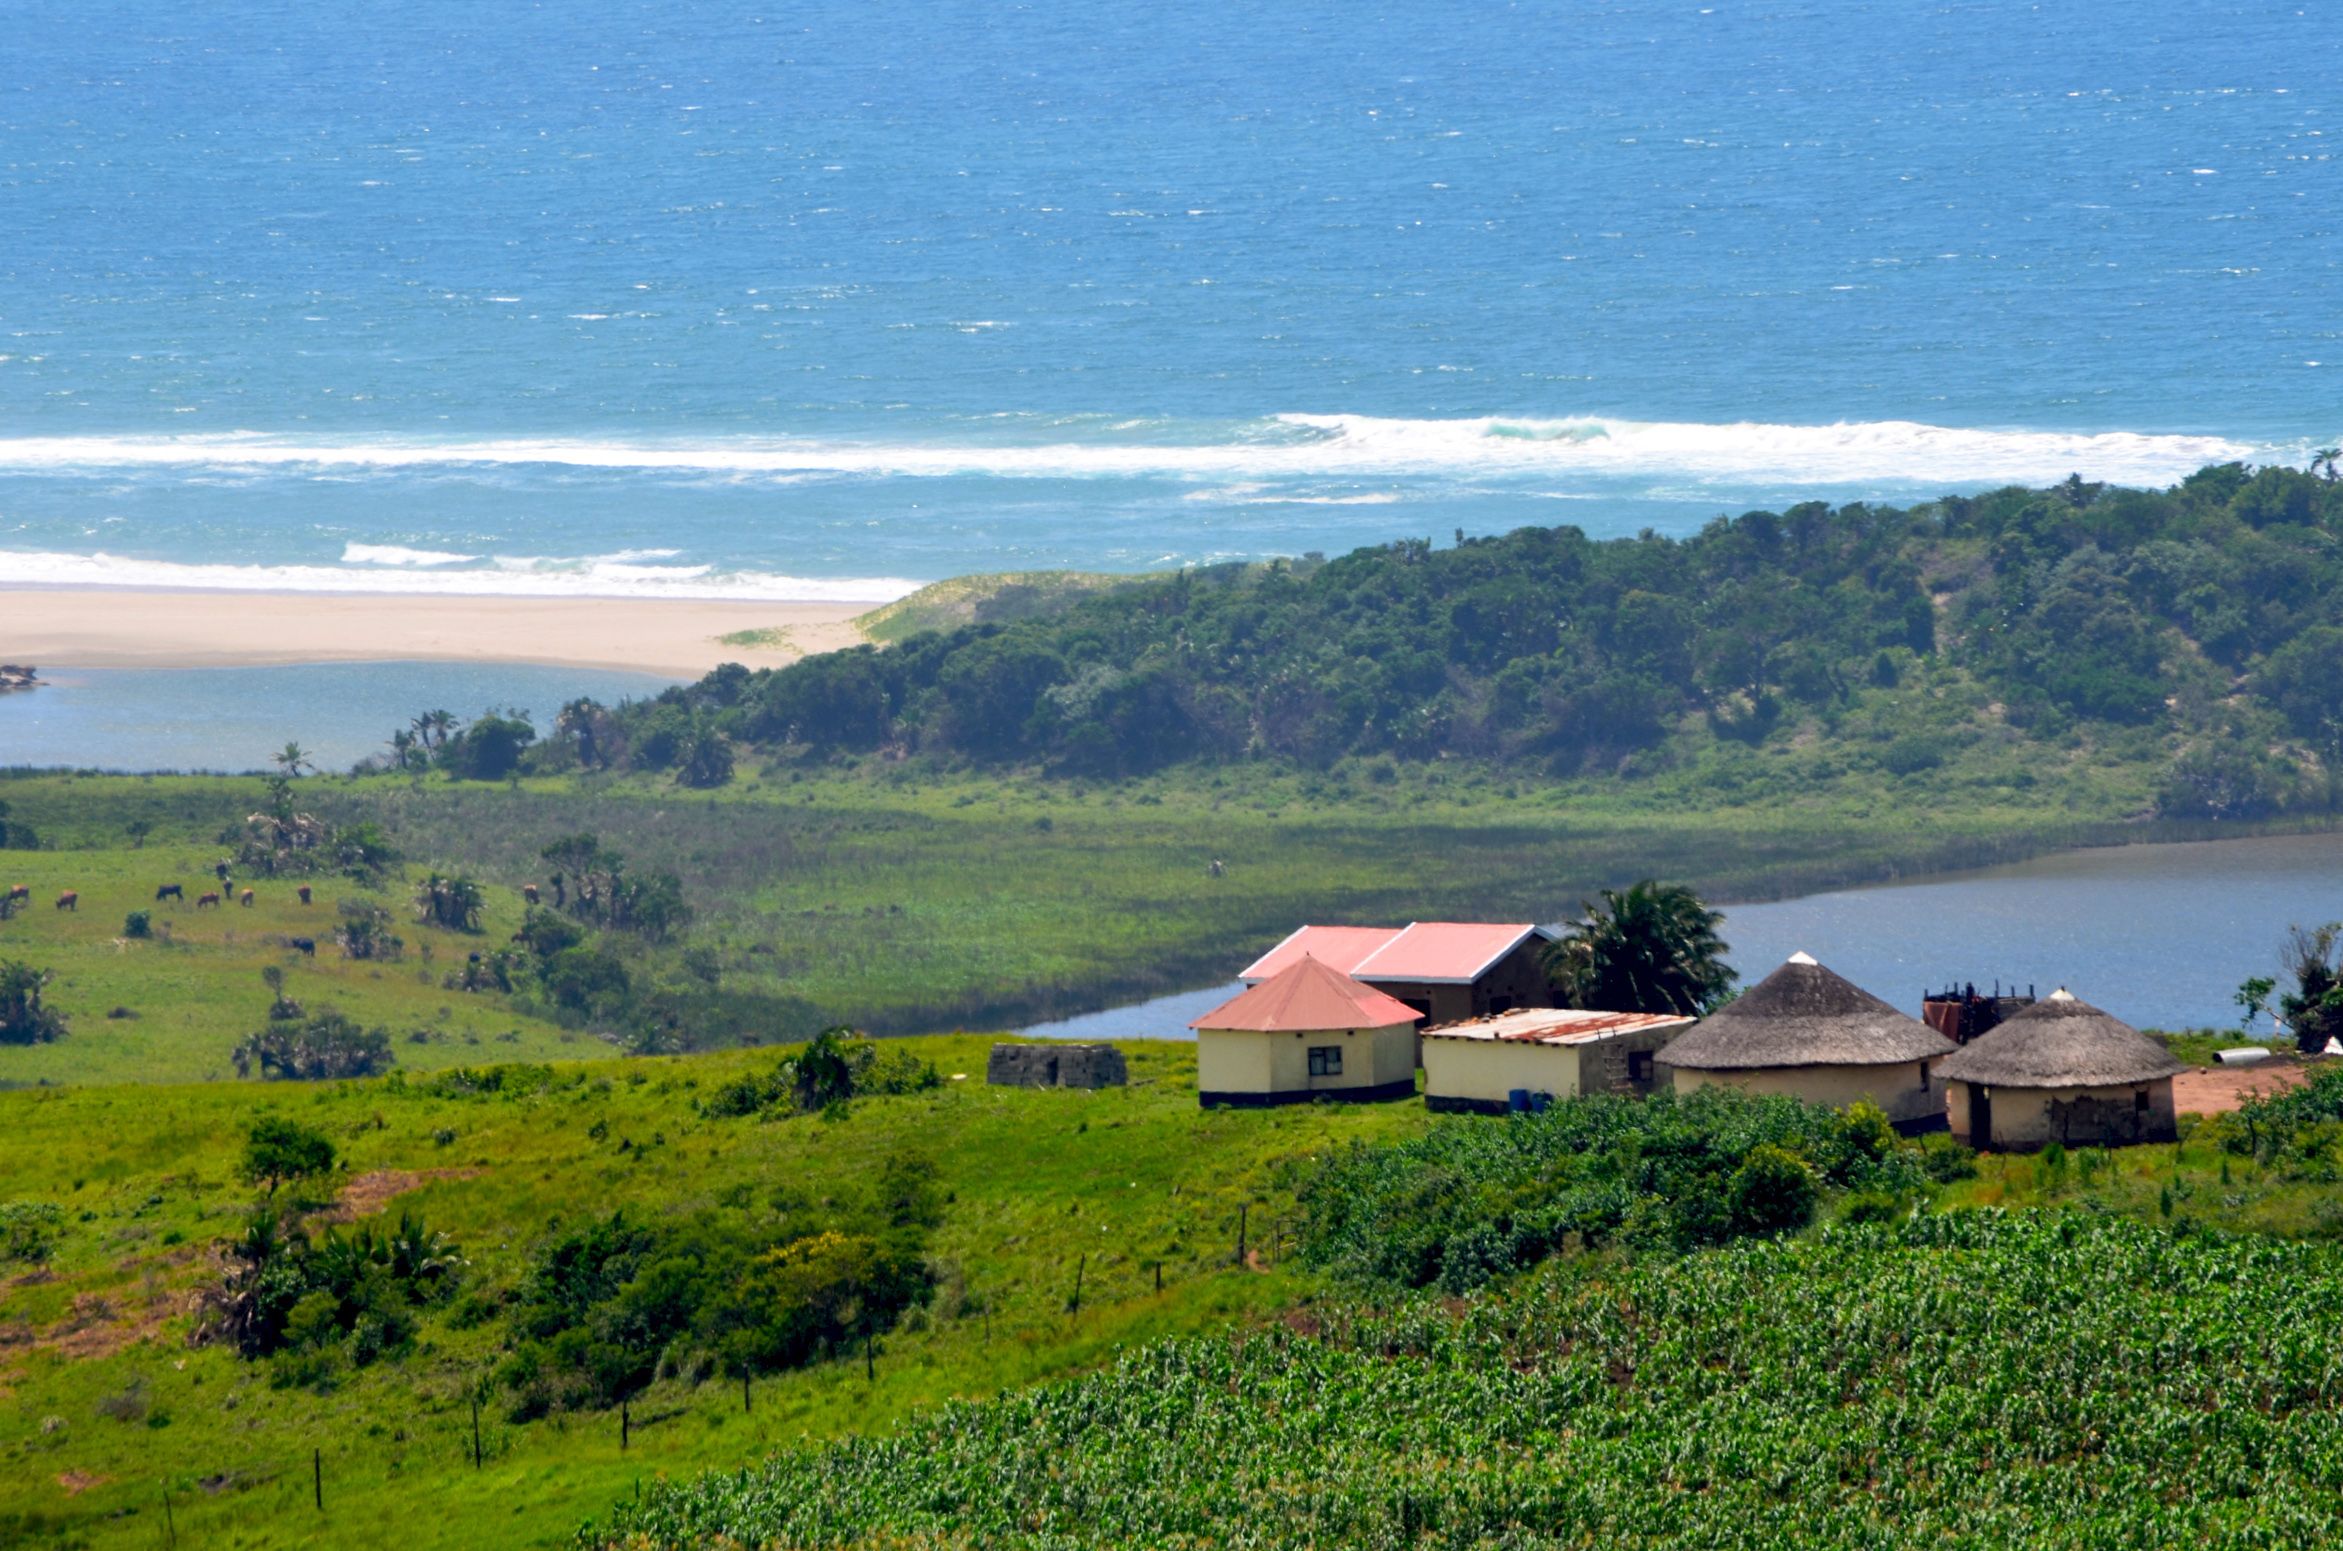 The coastal Amadiba area in South Africa's Eastern Cape province is the site of attempts to mine titanium-rich sand dunes.  Image by Mark Olalde. South Africa, 2016.